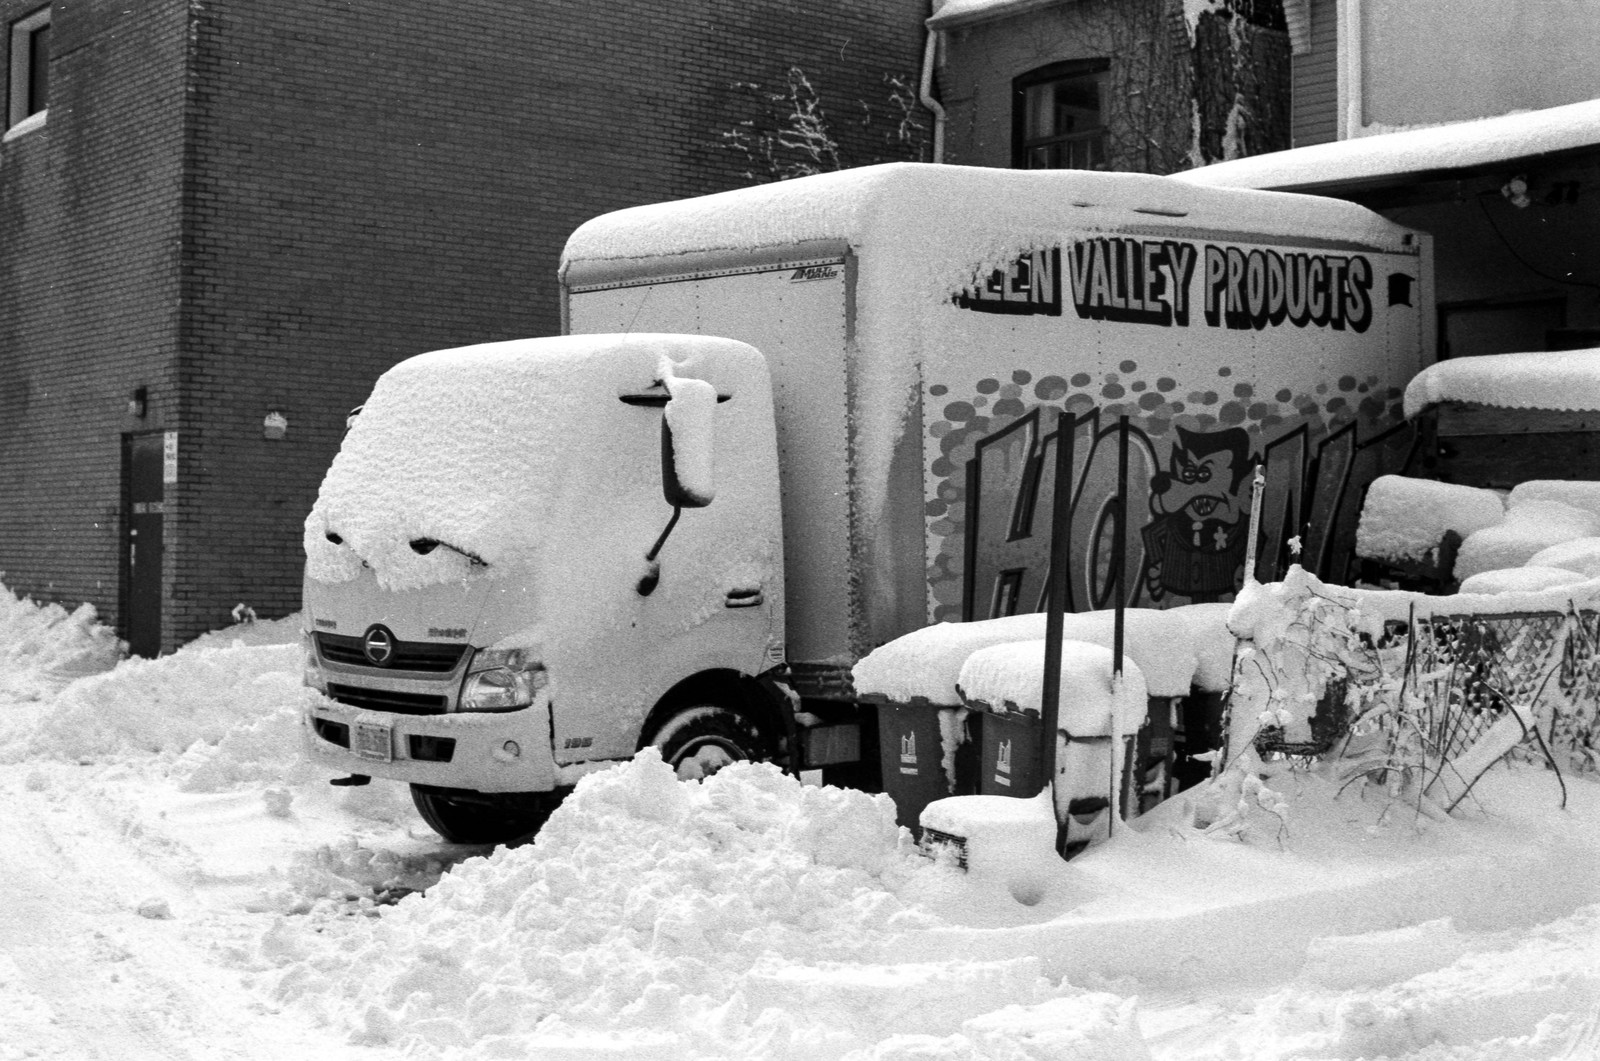 Snowed In Green Valley Products Delivery Van